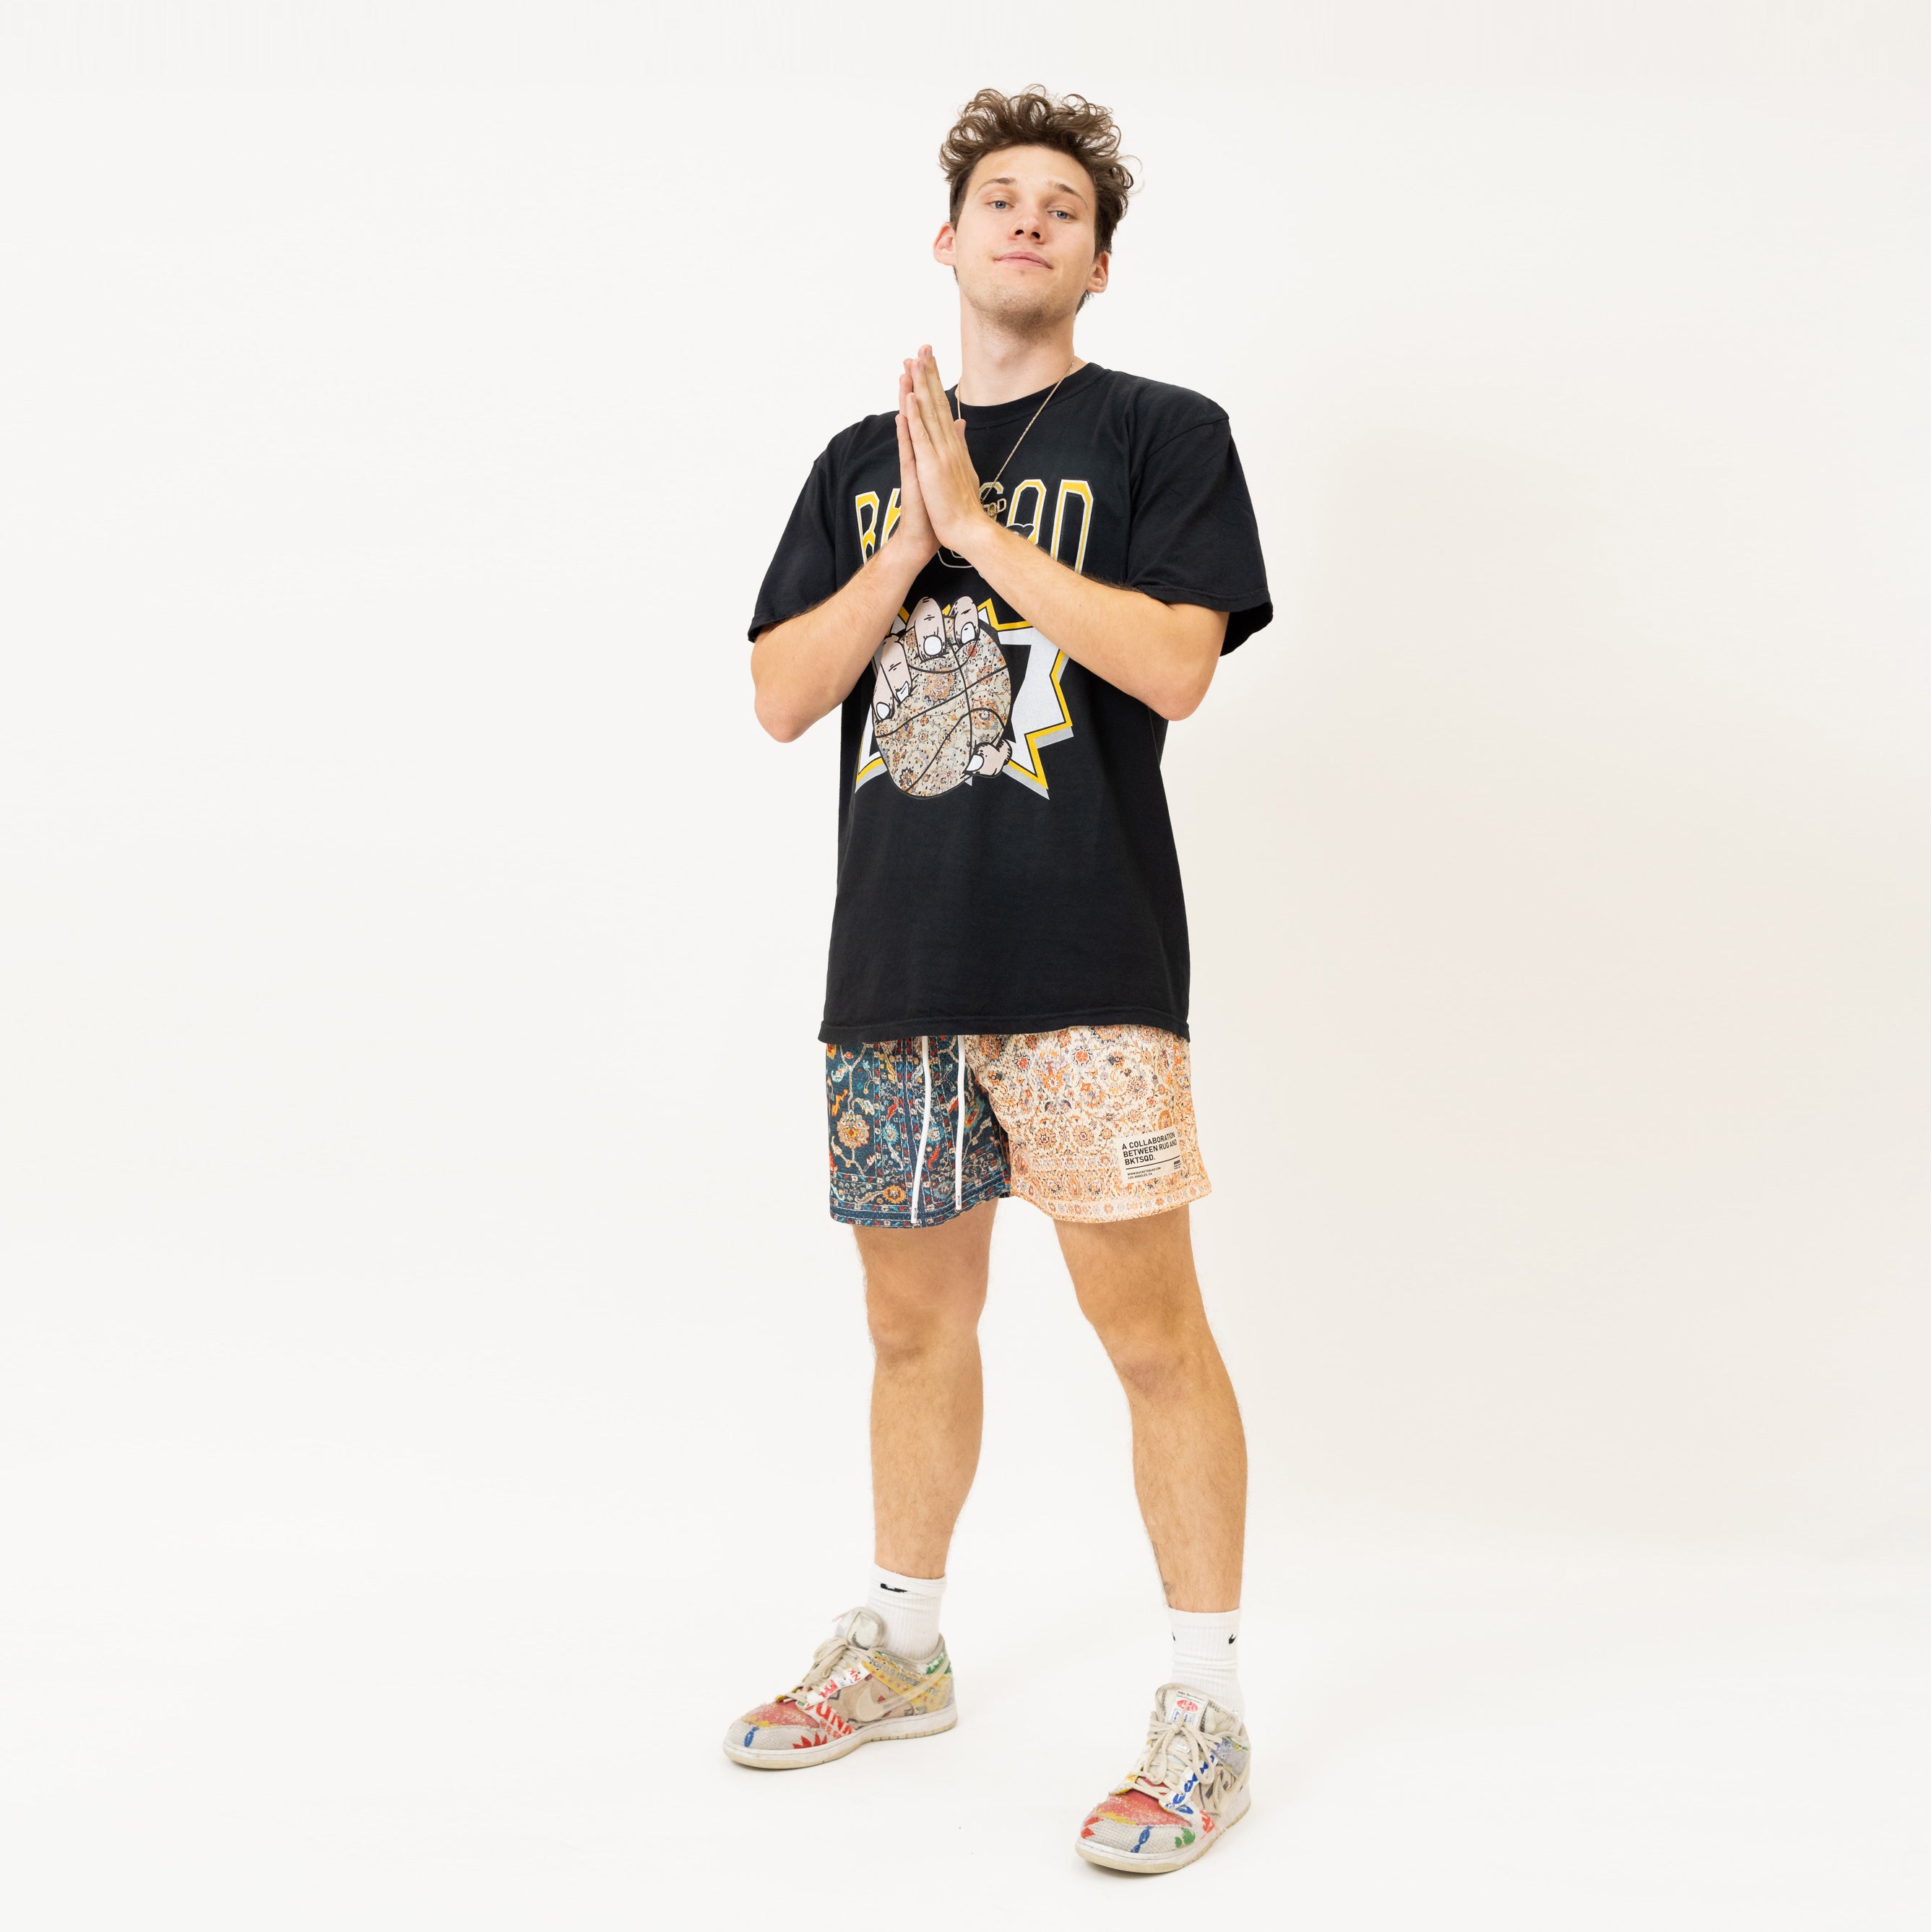 Jesse Riedel known as Jesser wearing the black bucketsquad collab shirt with faze rug. Paired with the two tone basketball shorts, Jesse stands with his hands in a prayer pose with a white background. 